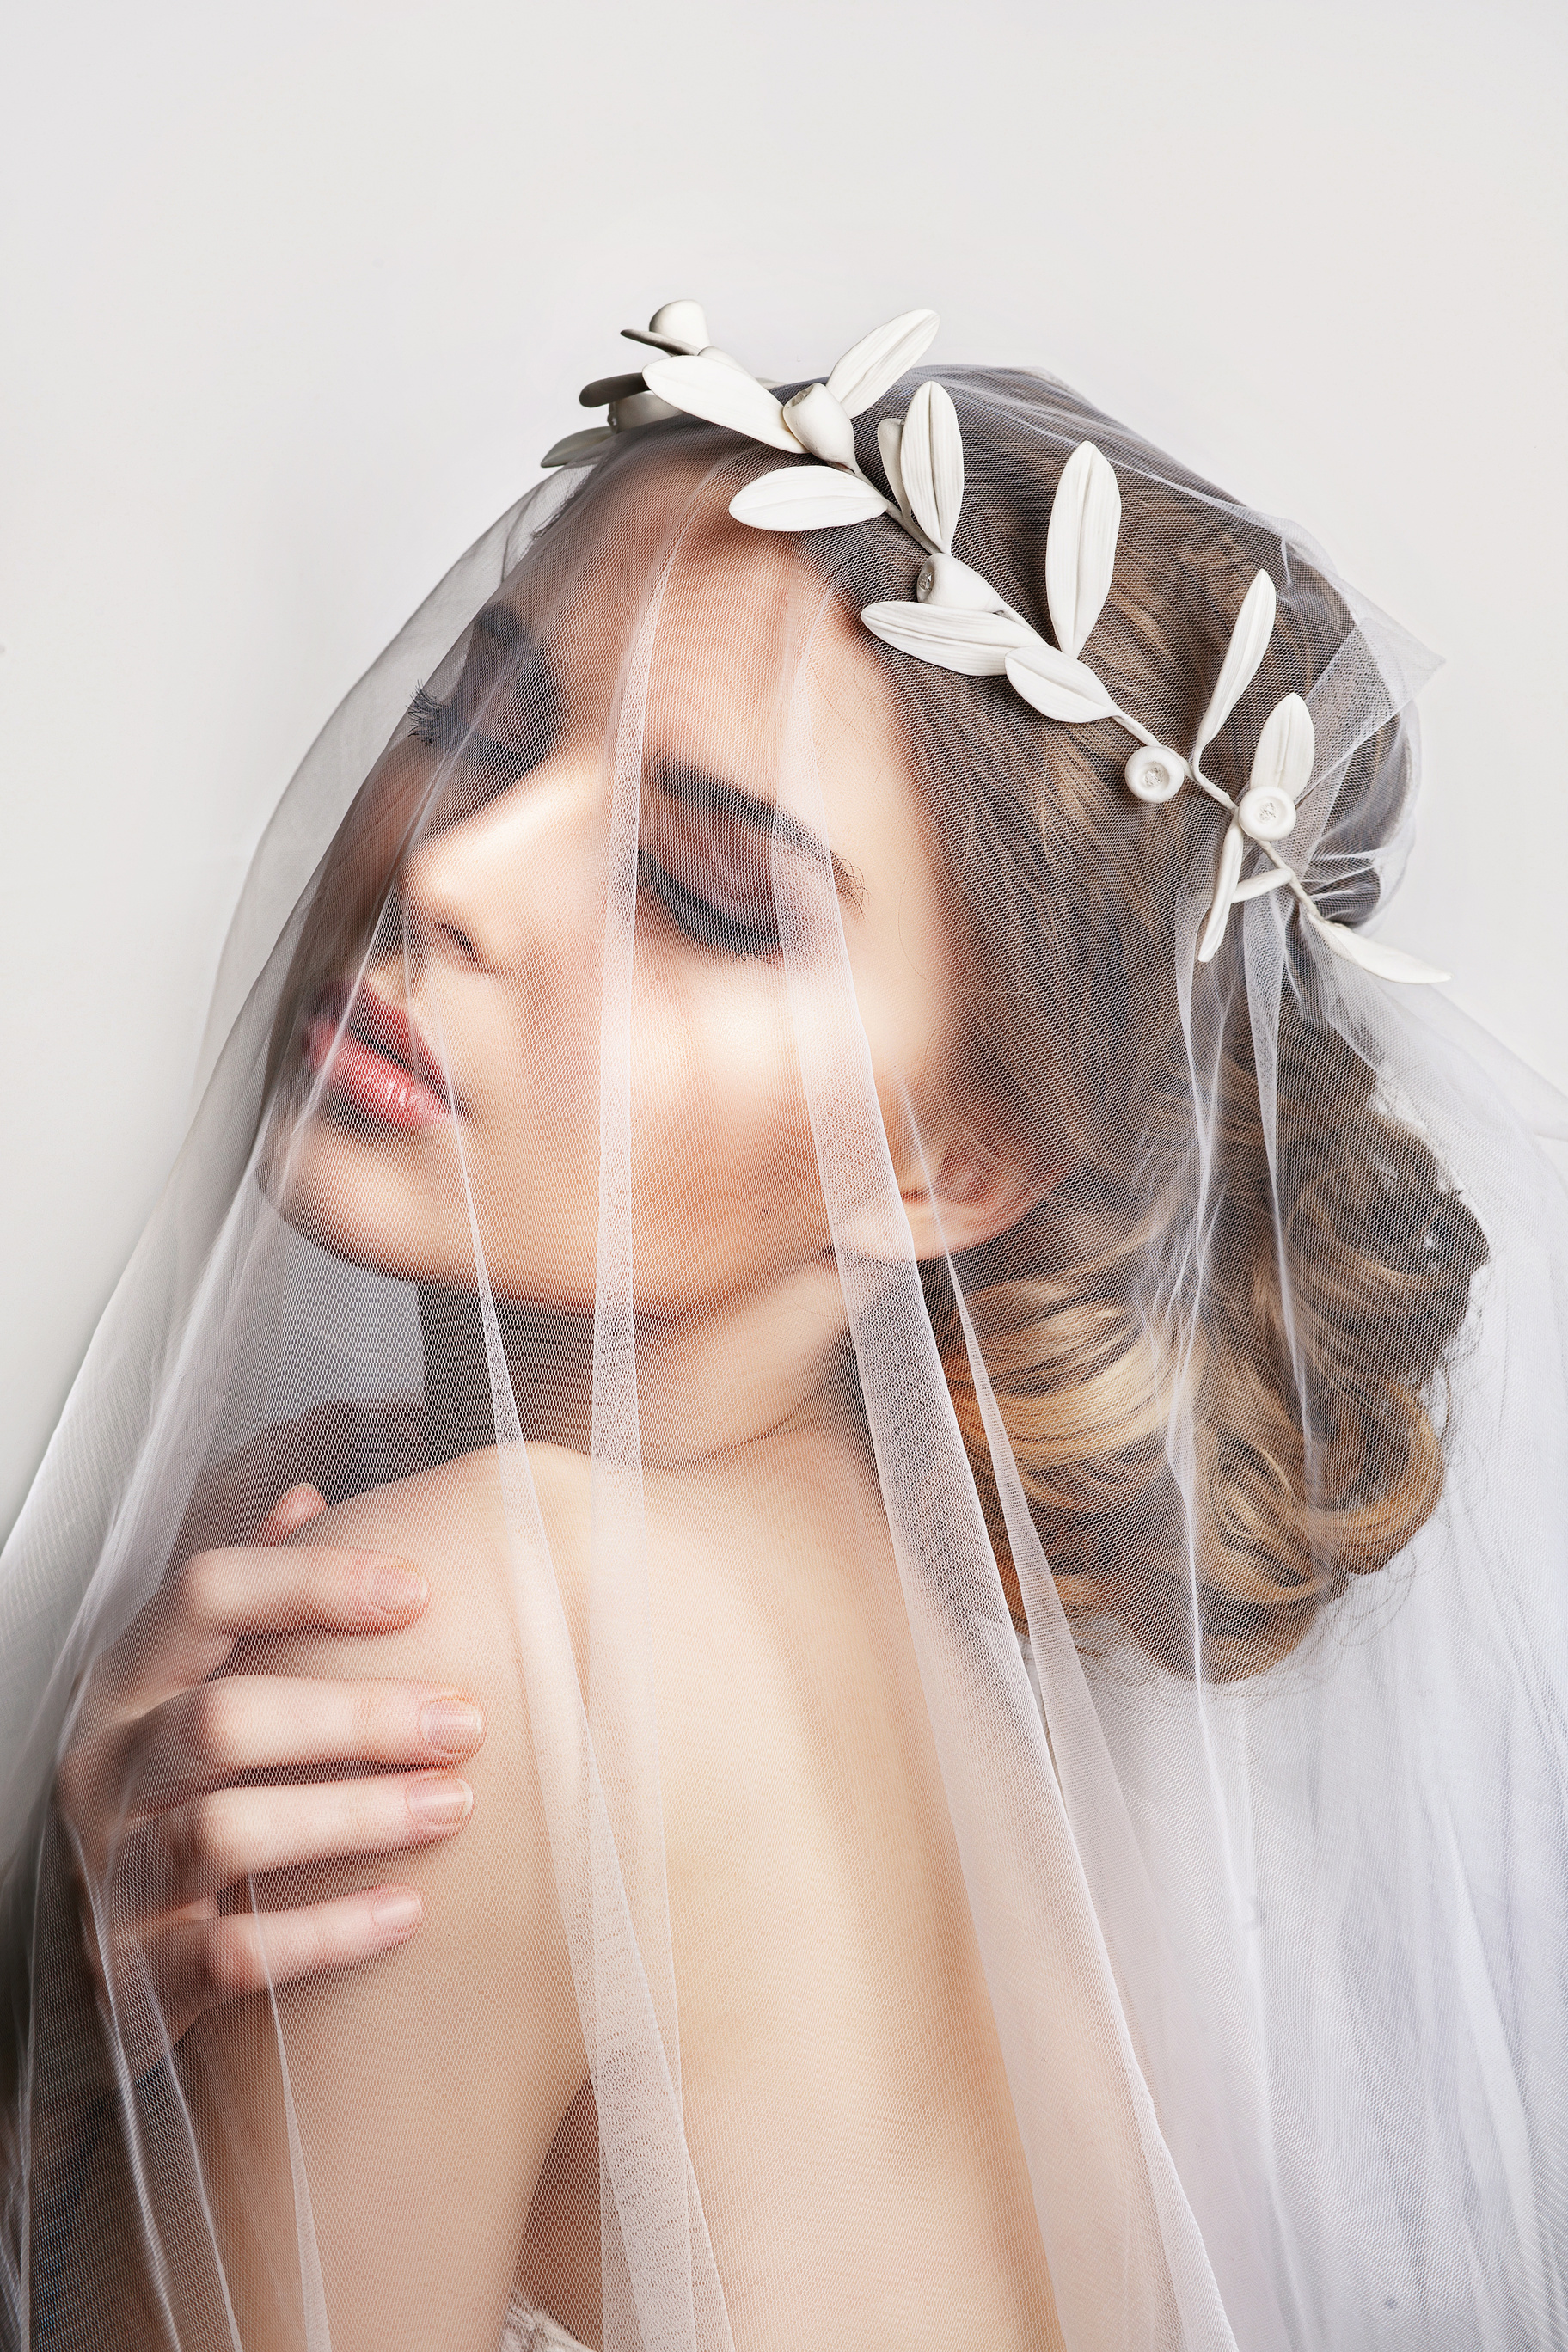 Beautiful bride with fashion wedding hairstyle - on white background. Close-up portrait of young gorgeous bride. Wedding. Beautiful bride portrait with veil over her face